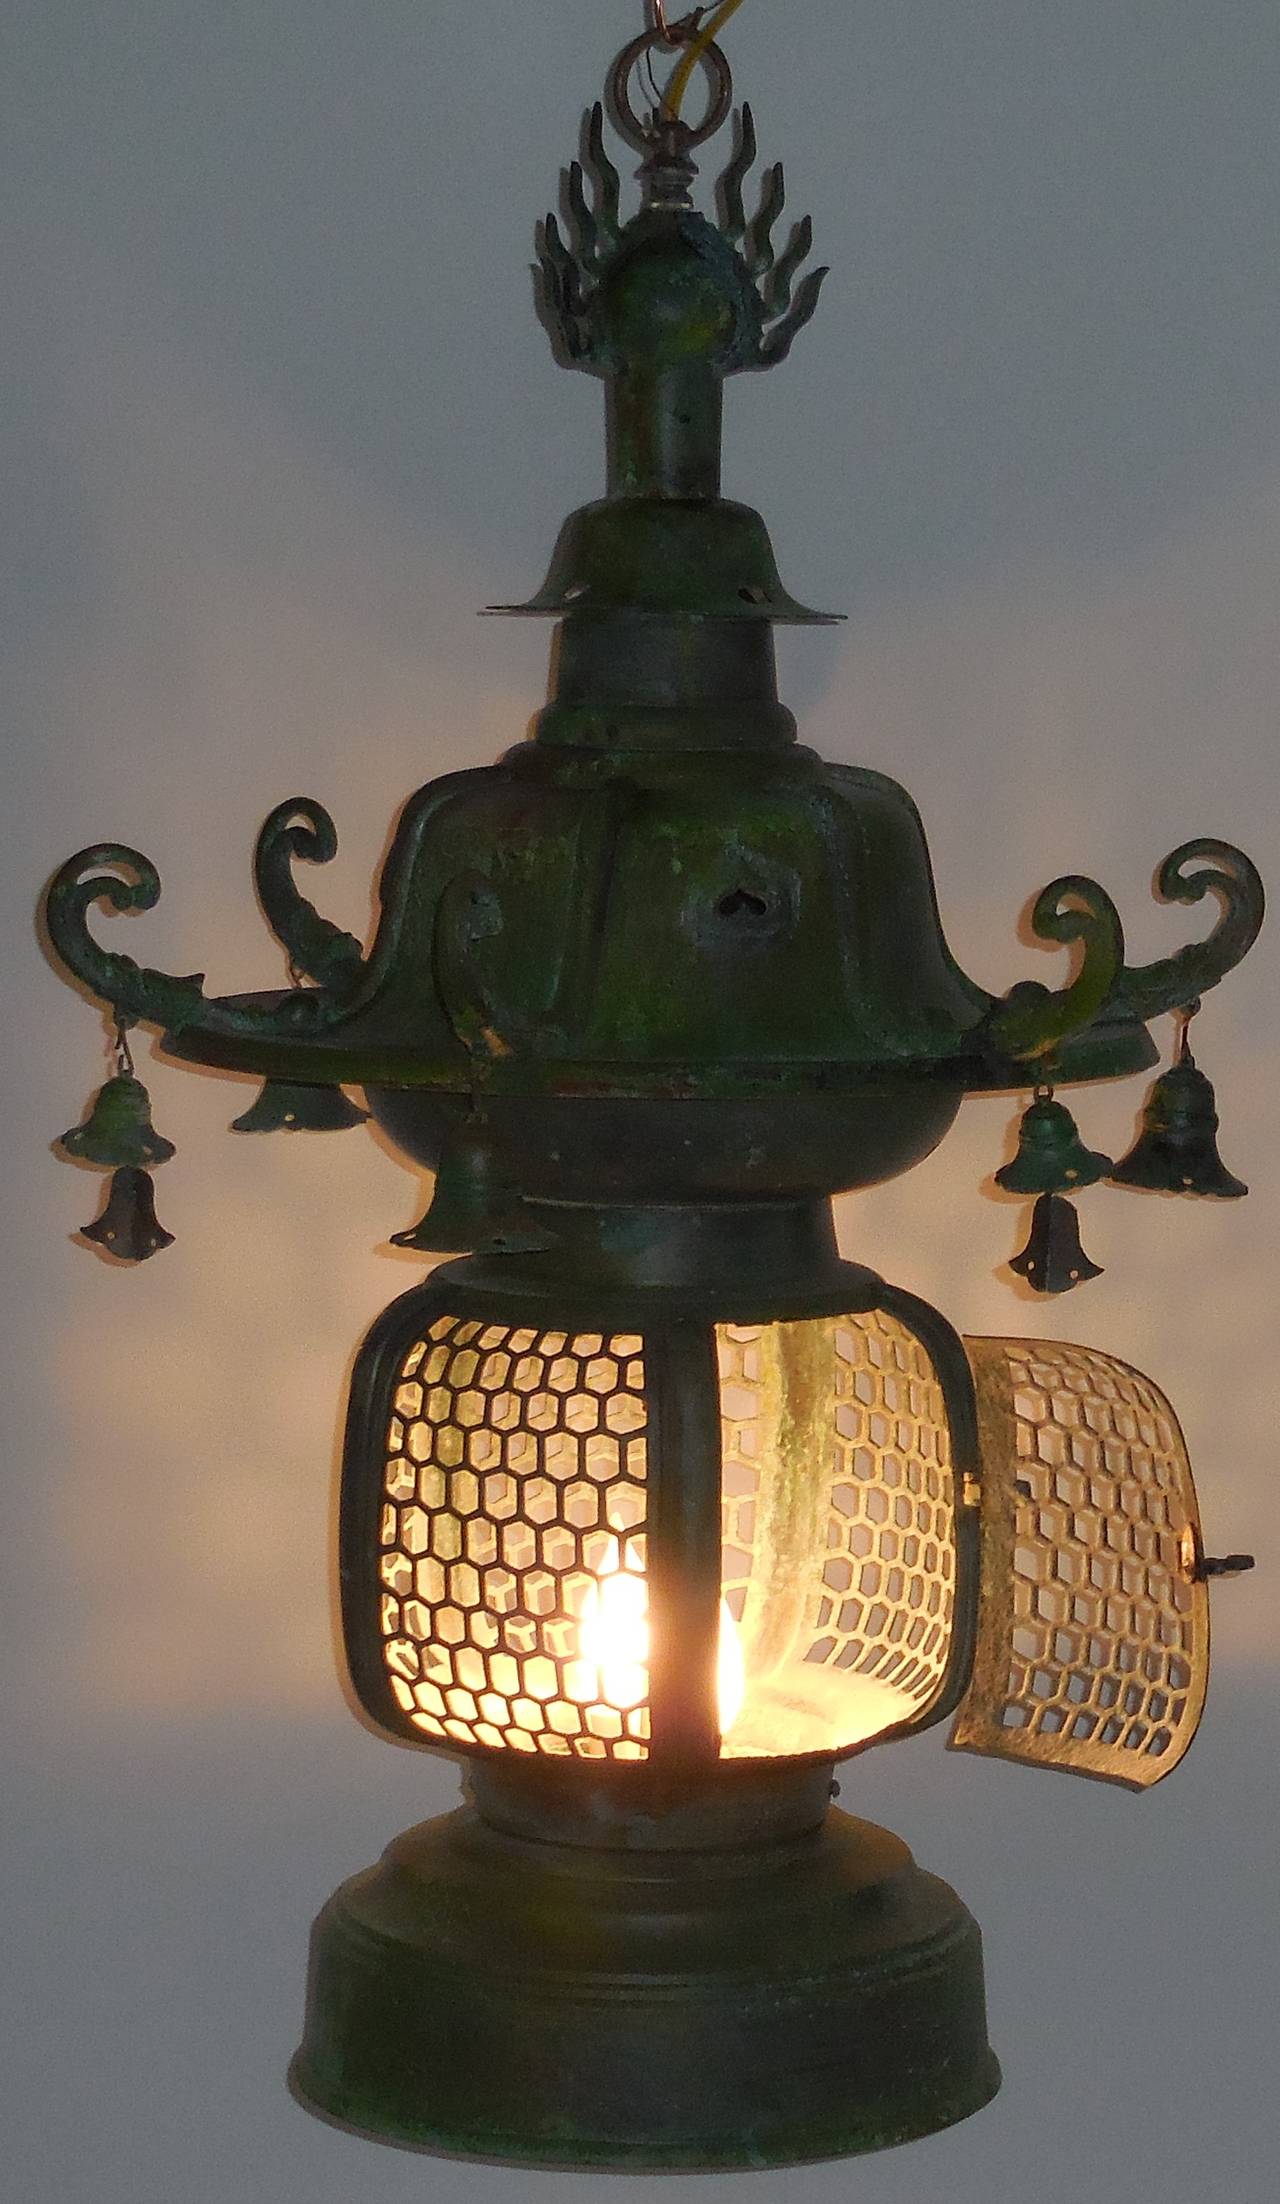 Antique copper hanging lantern, originally was a gas street lantern converted into hanging lantern. Wire with new brass steam with two 60/watt lights.
The lantern is decorated with six dragon heads and six bells hanging over them.
Some floral and